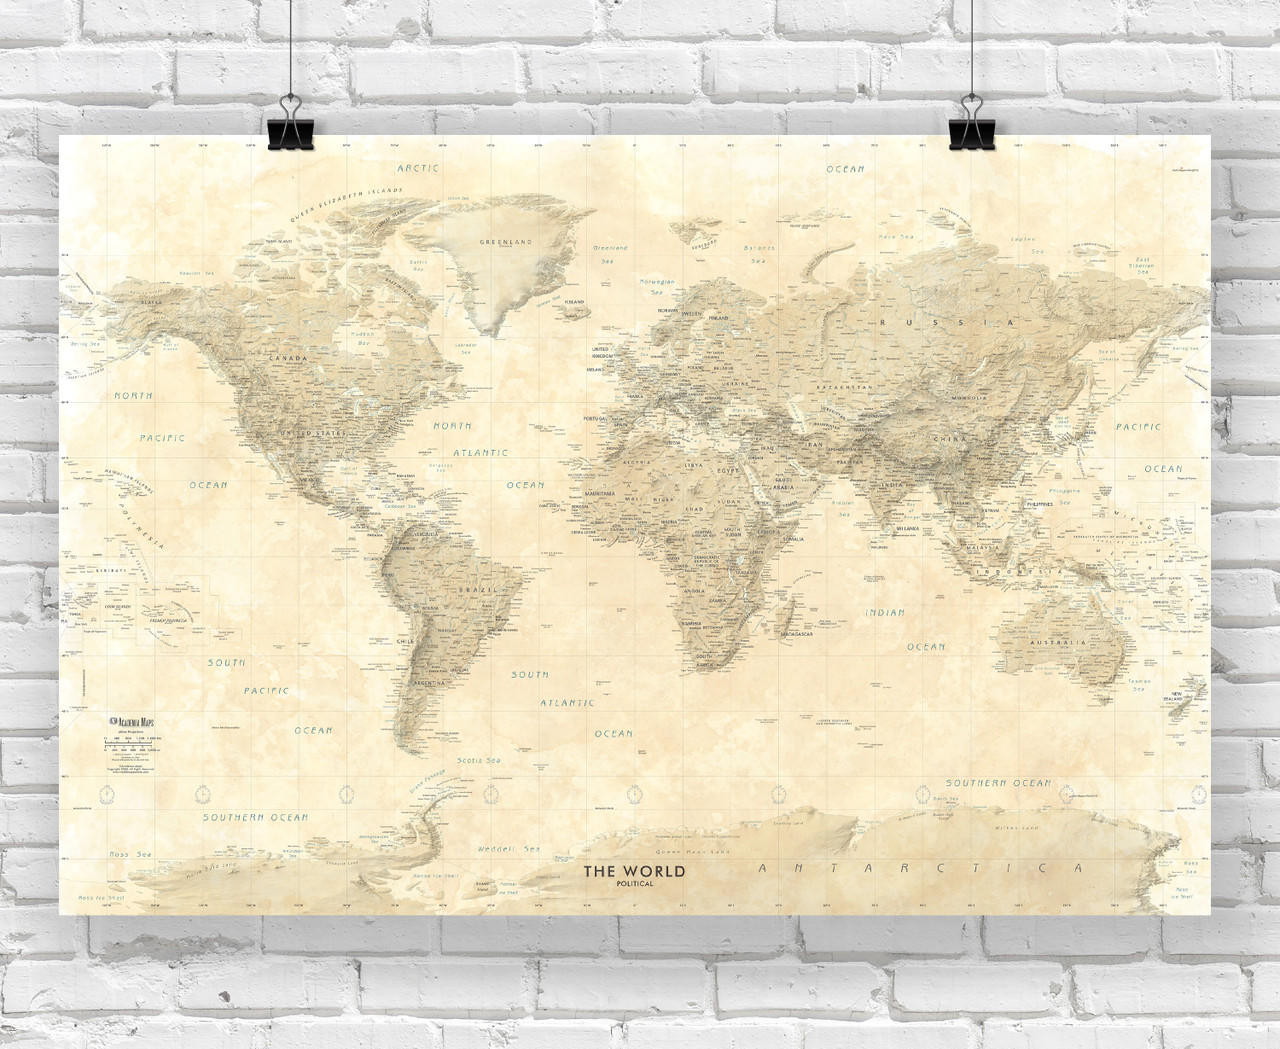 Sepia Tones World Political Map Wall Map World Maps Online